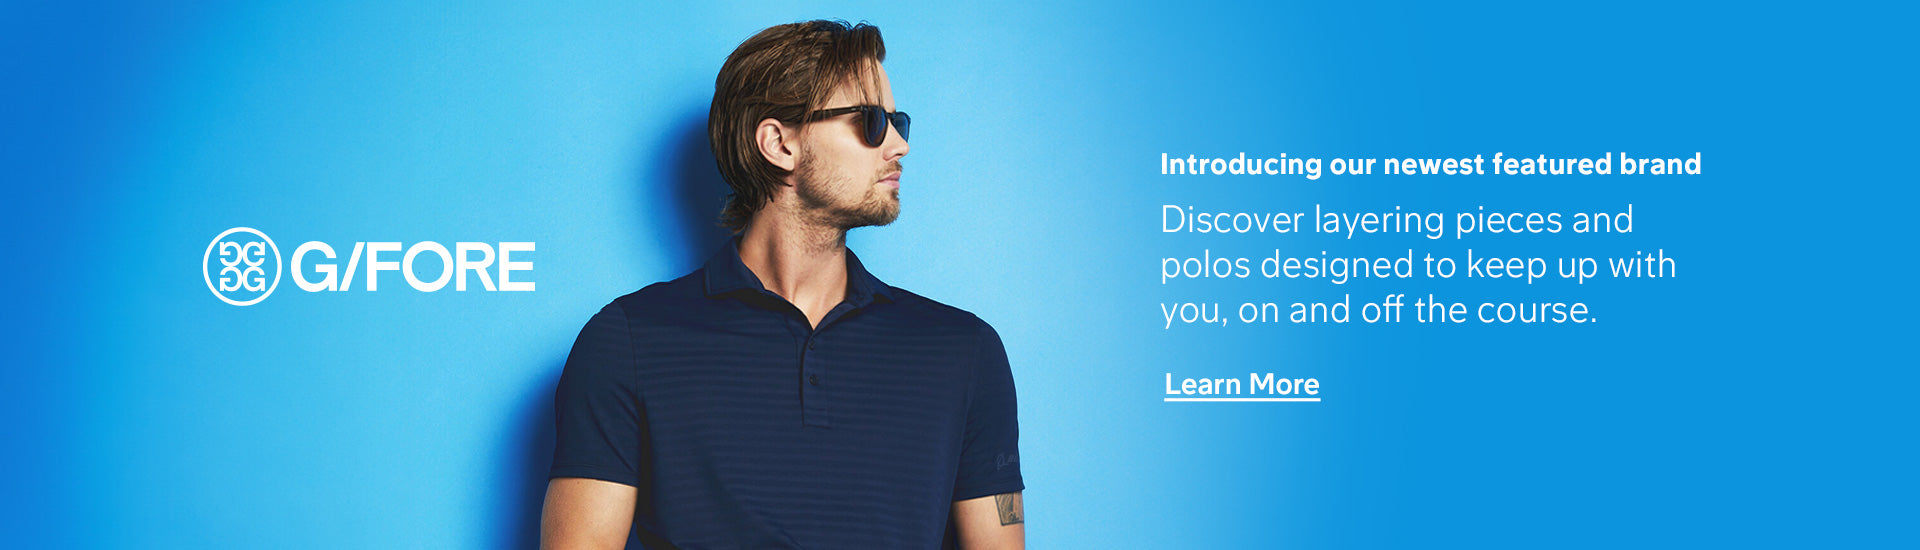 G/FORE Desktop Homepage Banner Featuring Man Wearing Polo